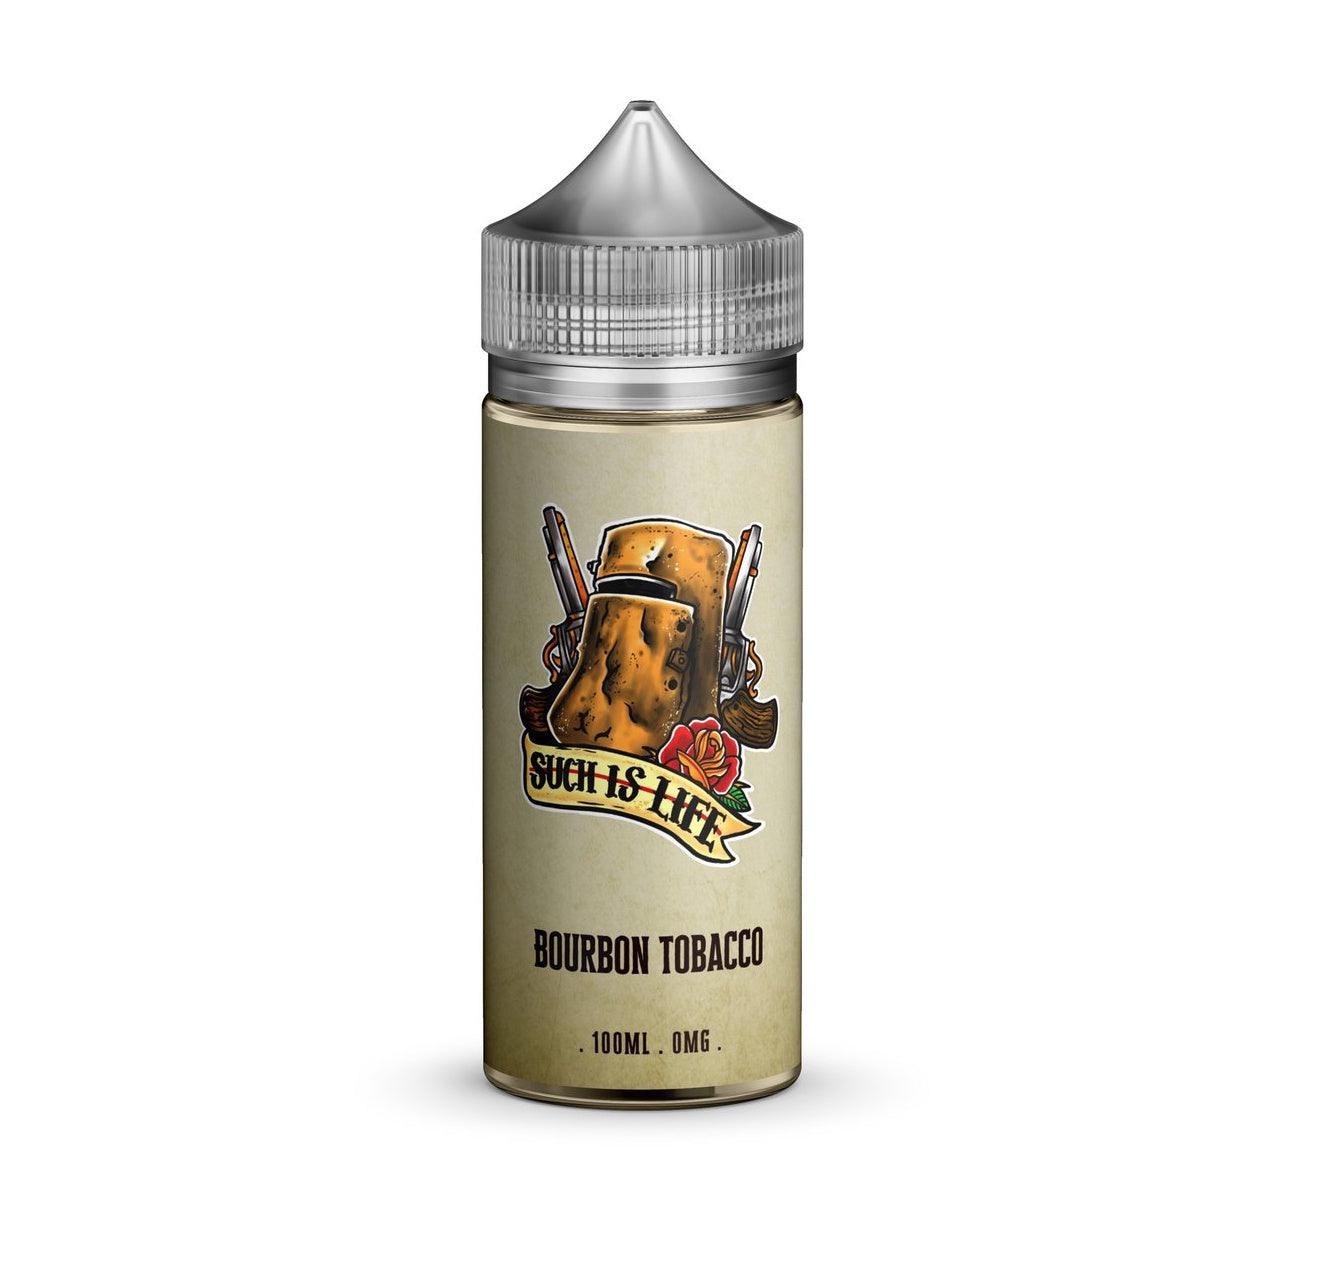 Such Is Life - Bourbon Tobacco - The Vape Store